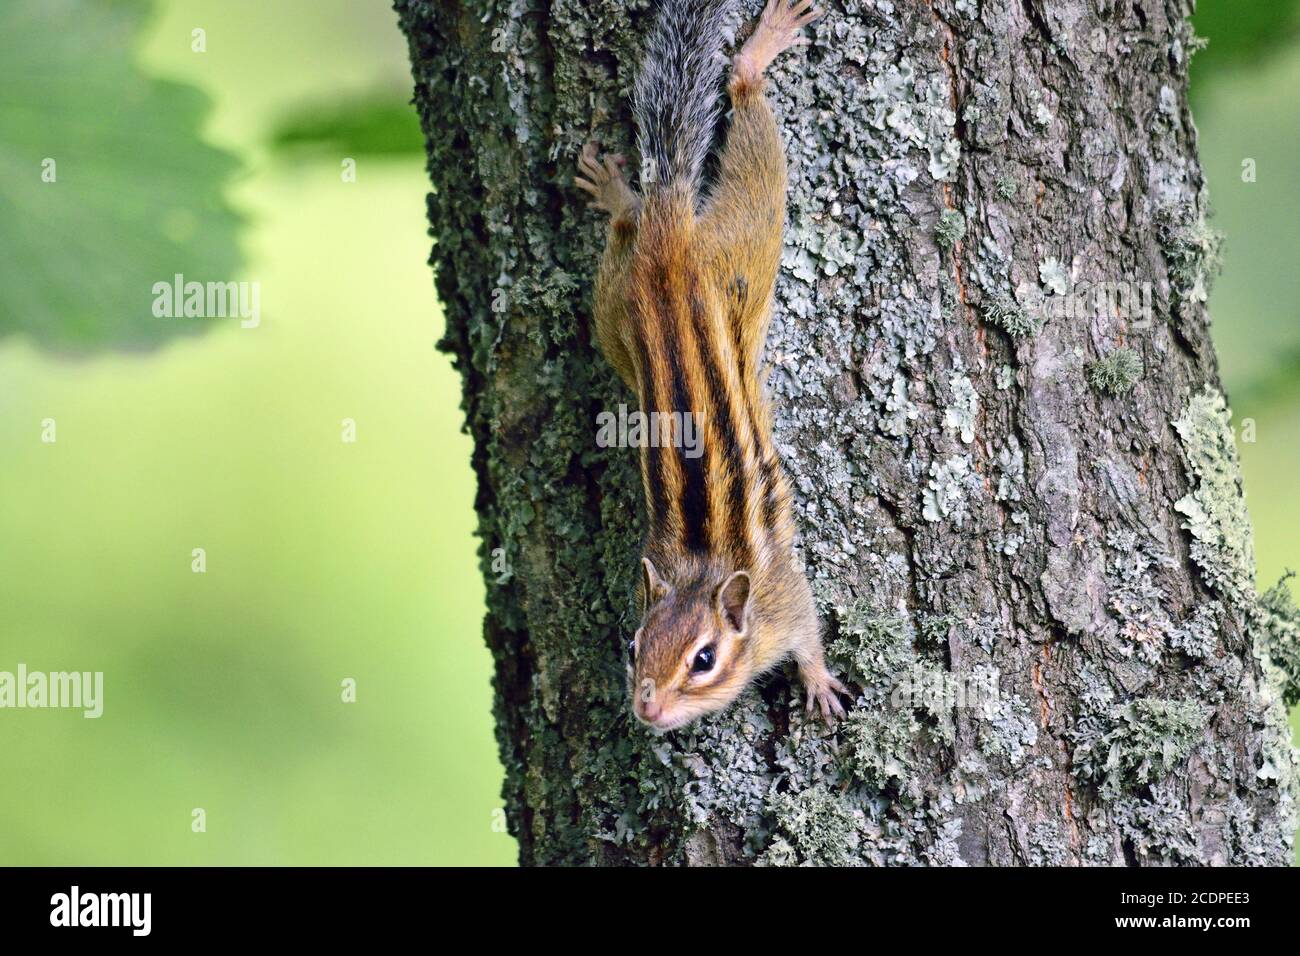 small chipmunk on trunk Stock Photo